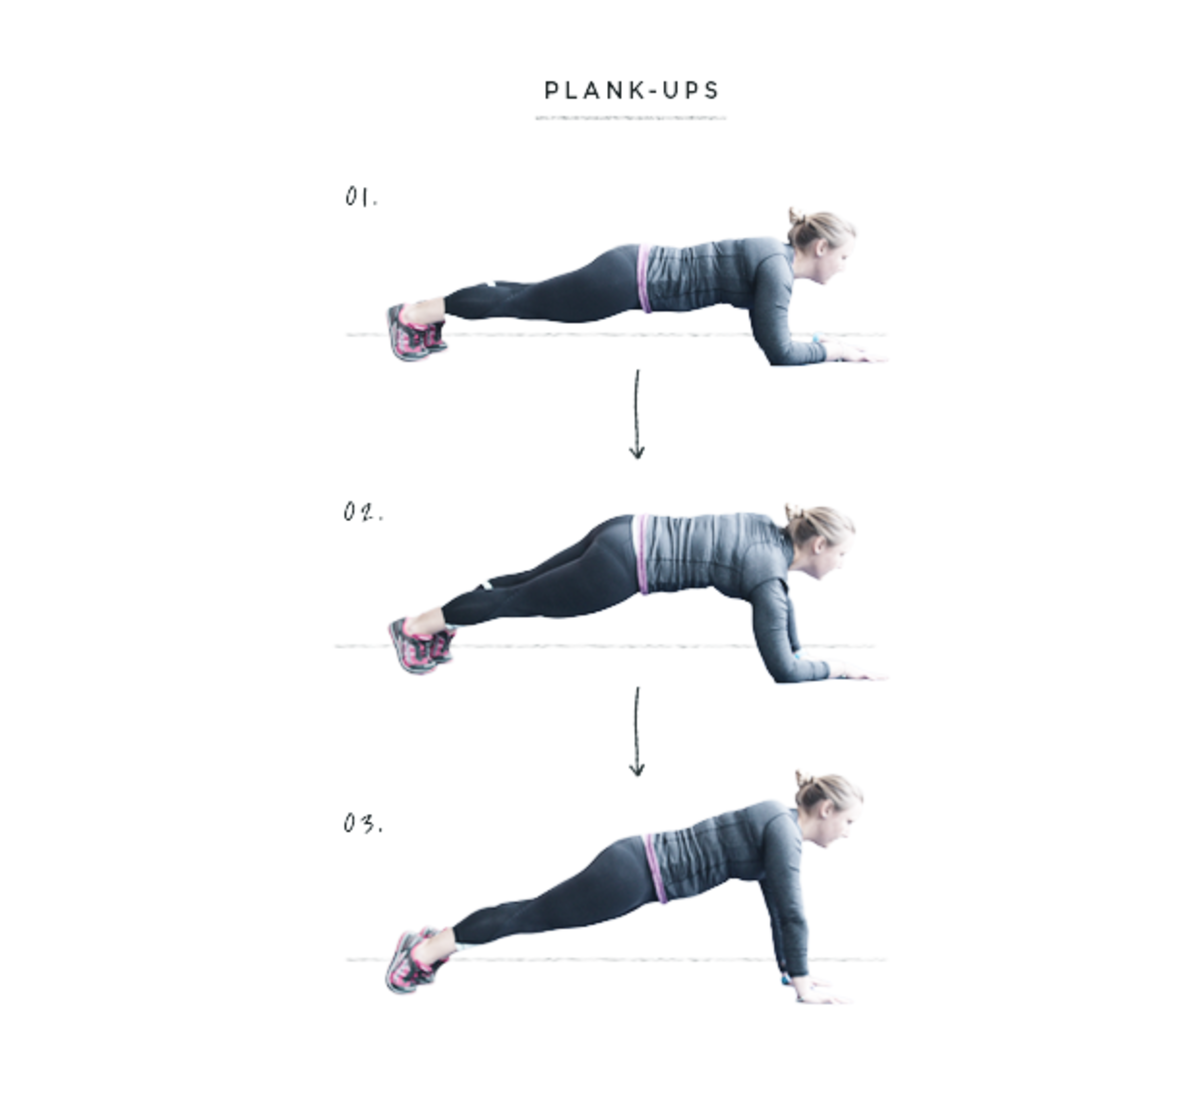 Kelder Startpunt Schema Do These 3 Easy Plank Exercises to Keep Your Core Strong - Verily